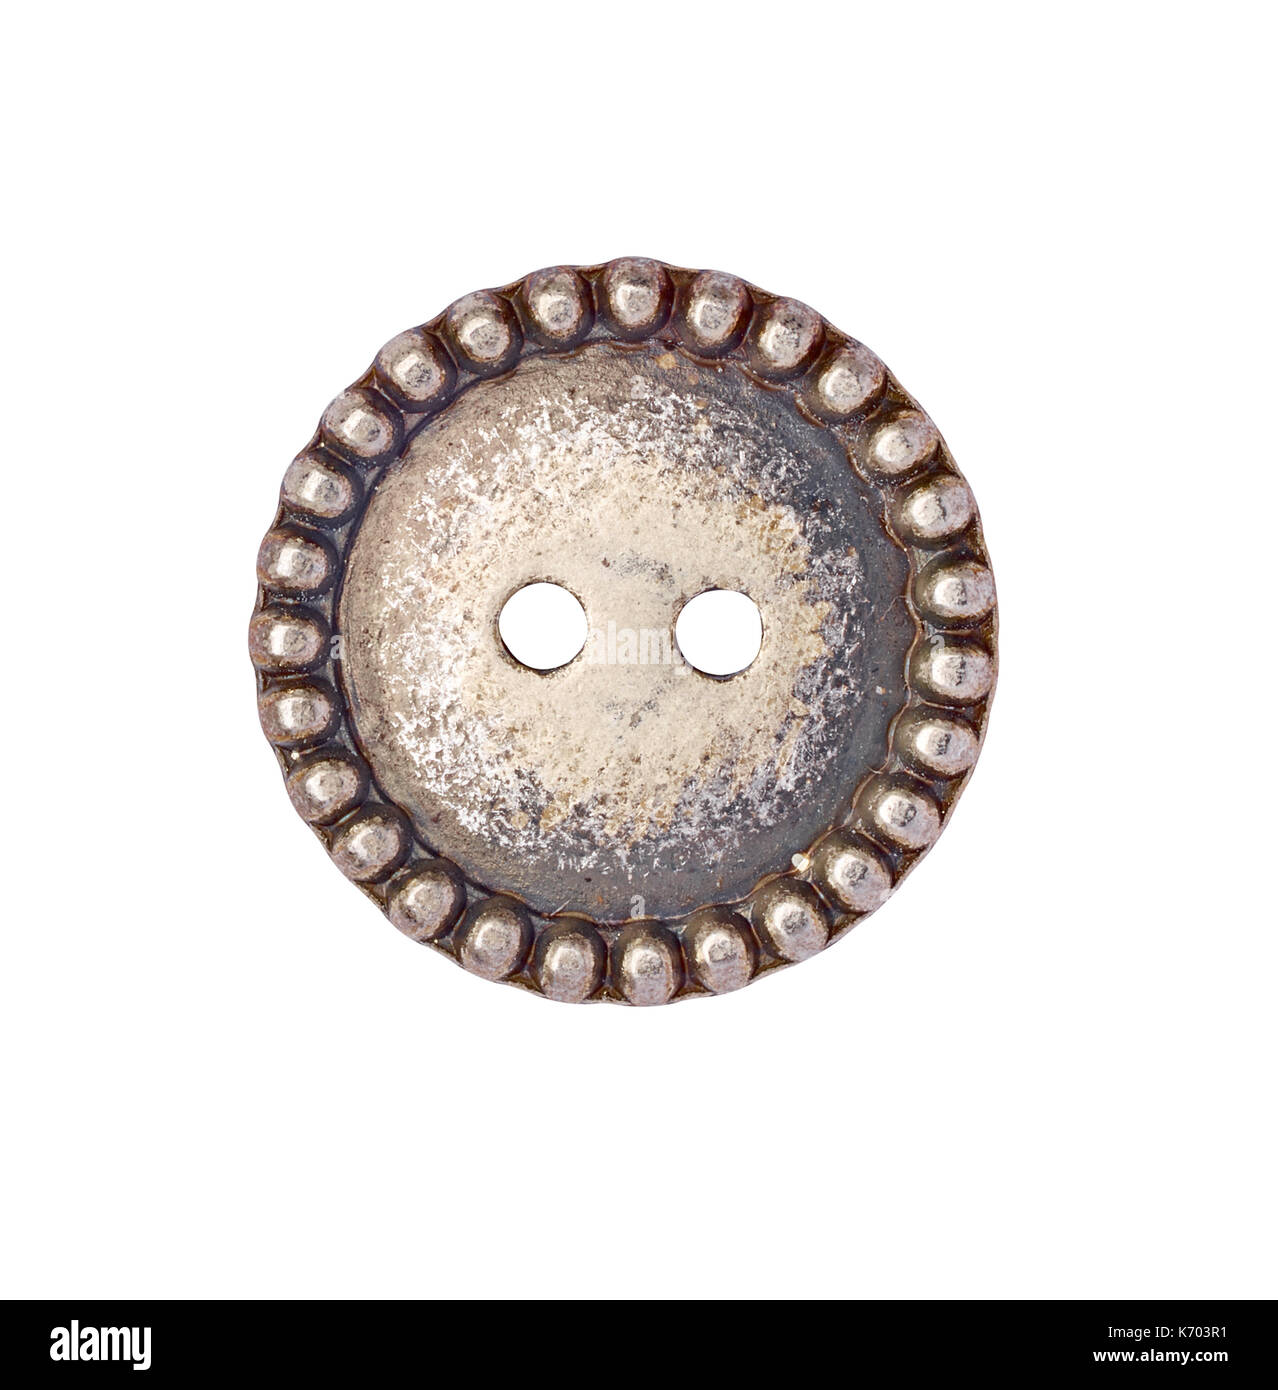 A Variety Of Vintage Jean Buttons On White Background Stock Photo